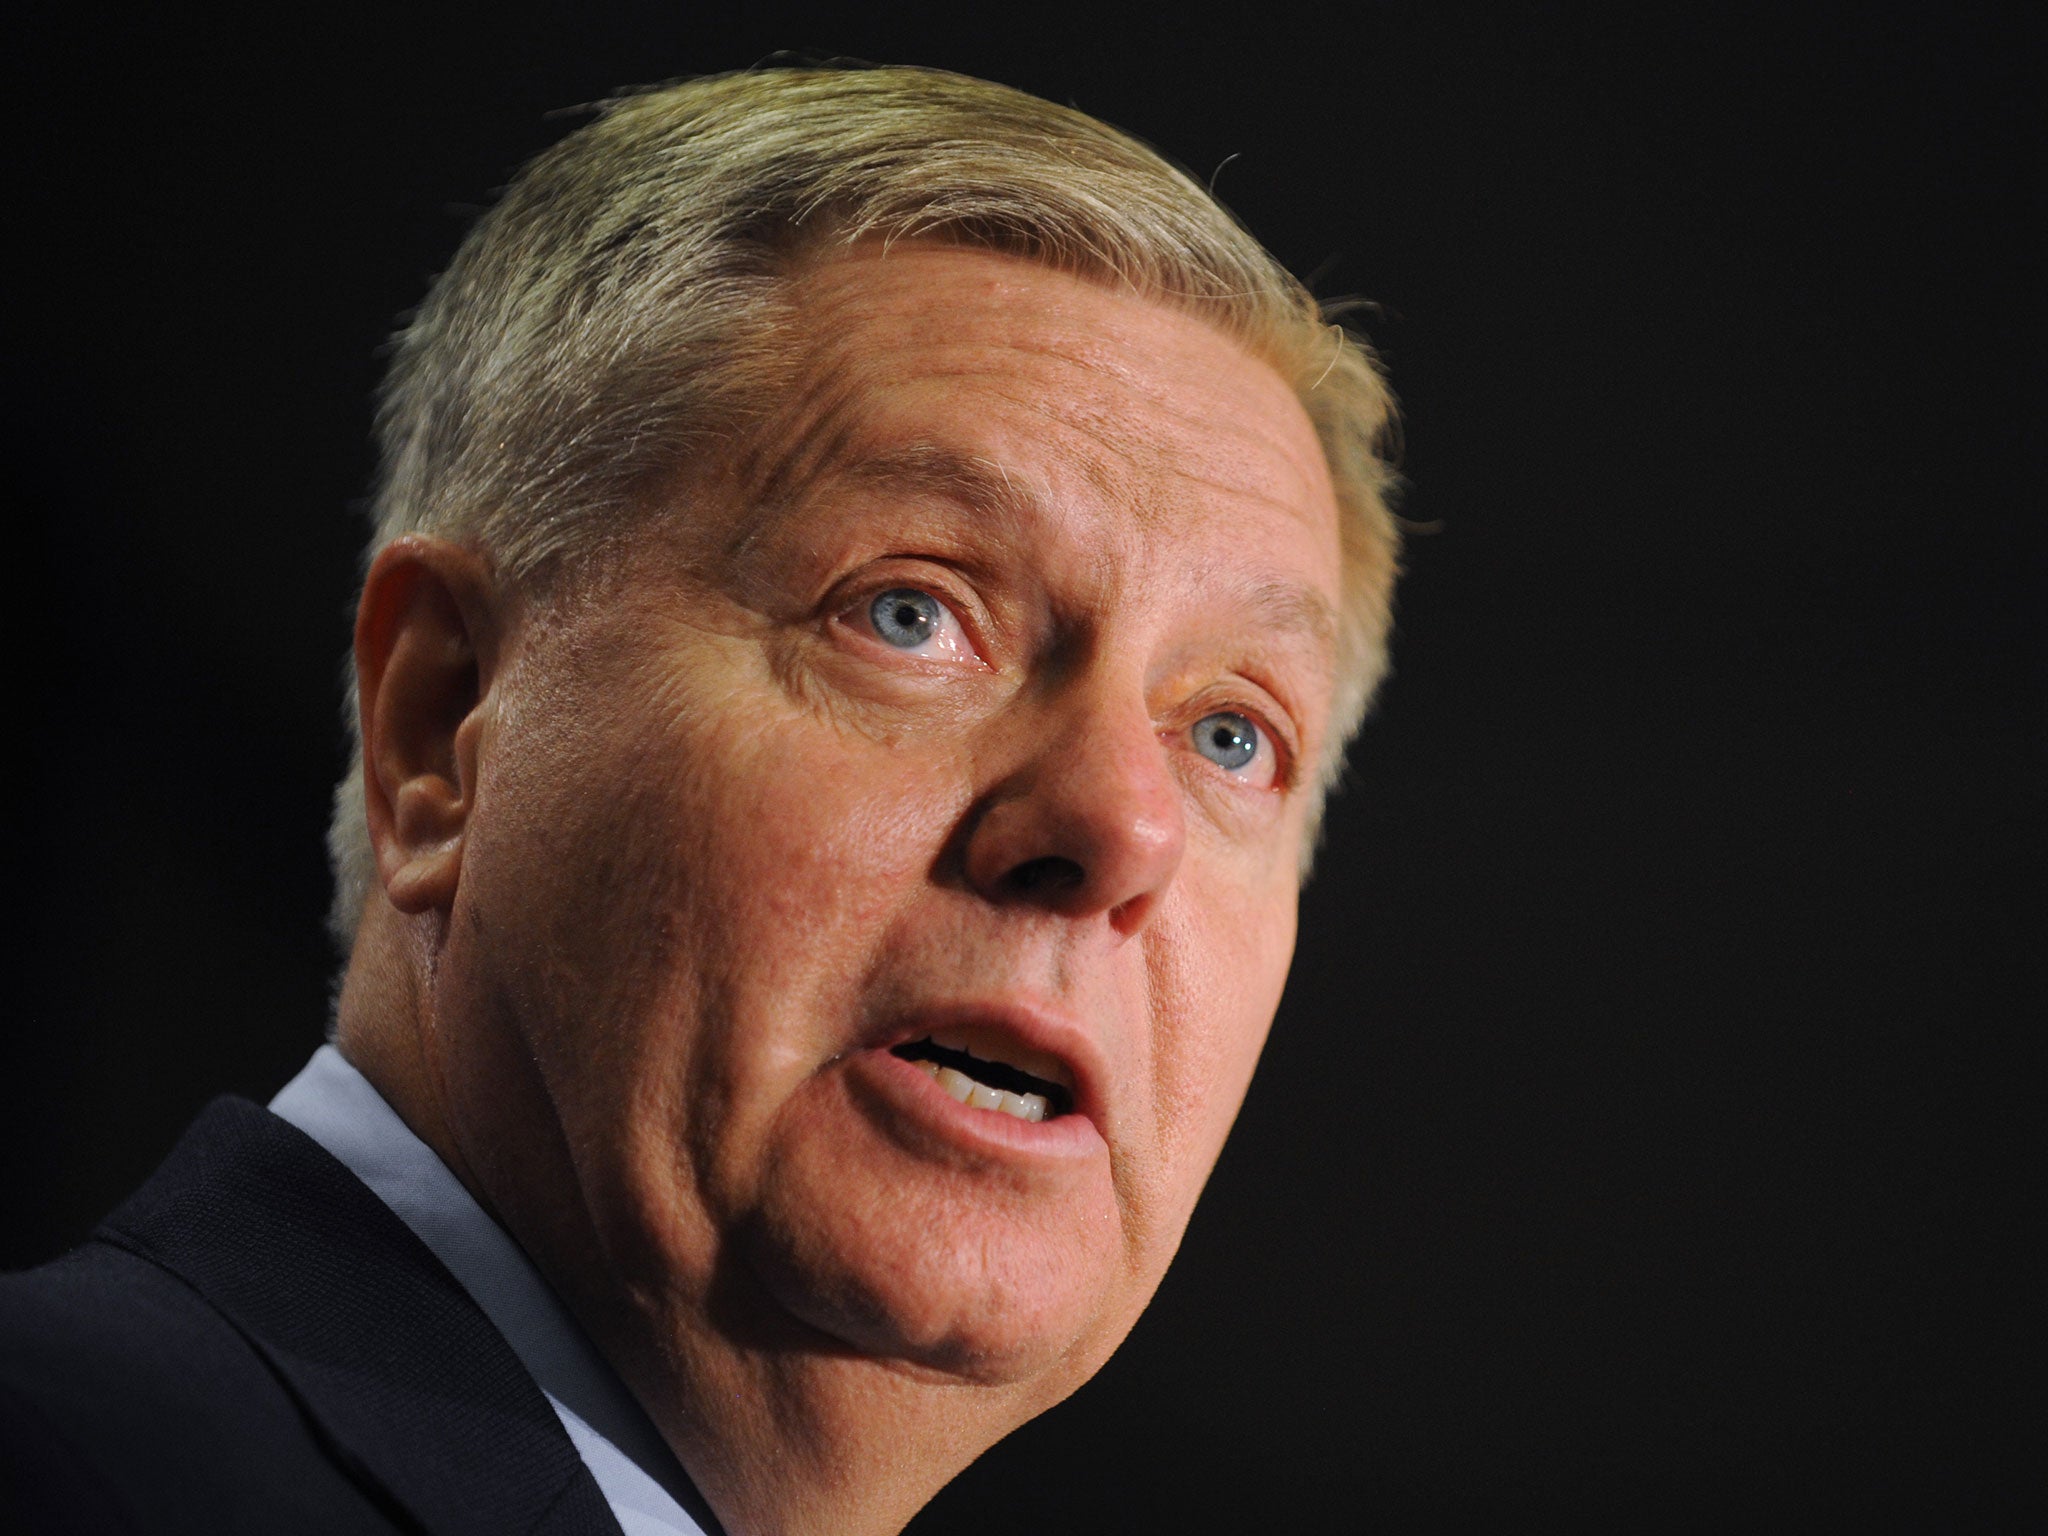 Senator Lindsey Graham said existing US legislation 'would cut off aid to the Palestinians if they filed a complaint.'